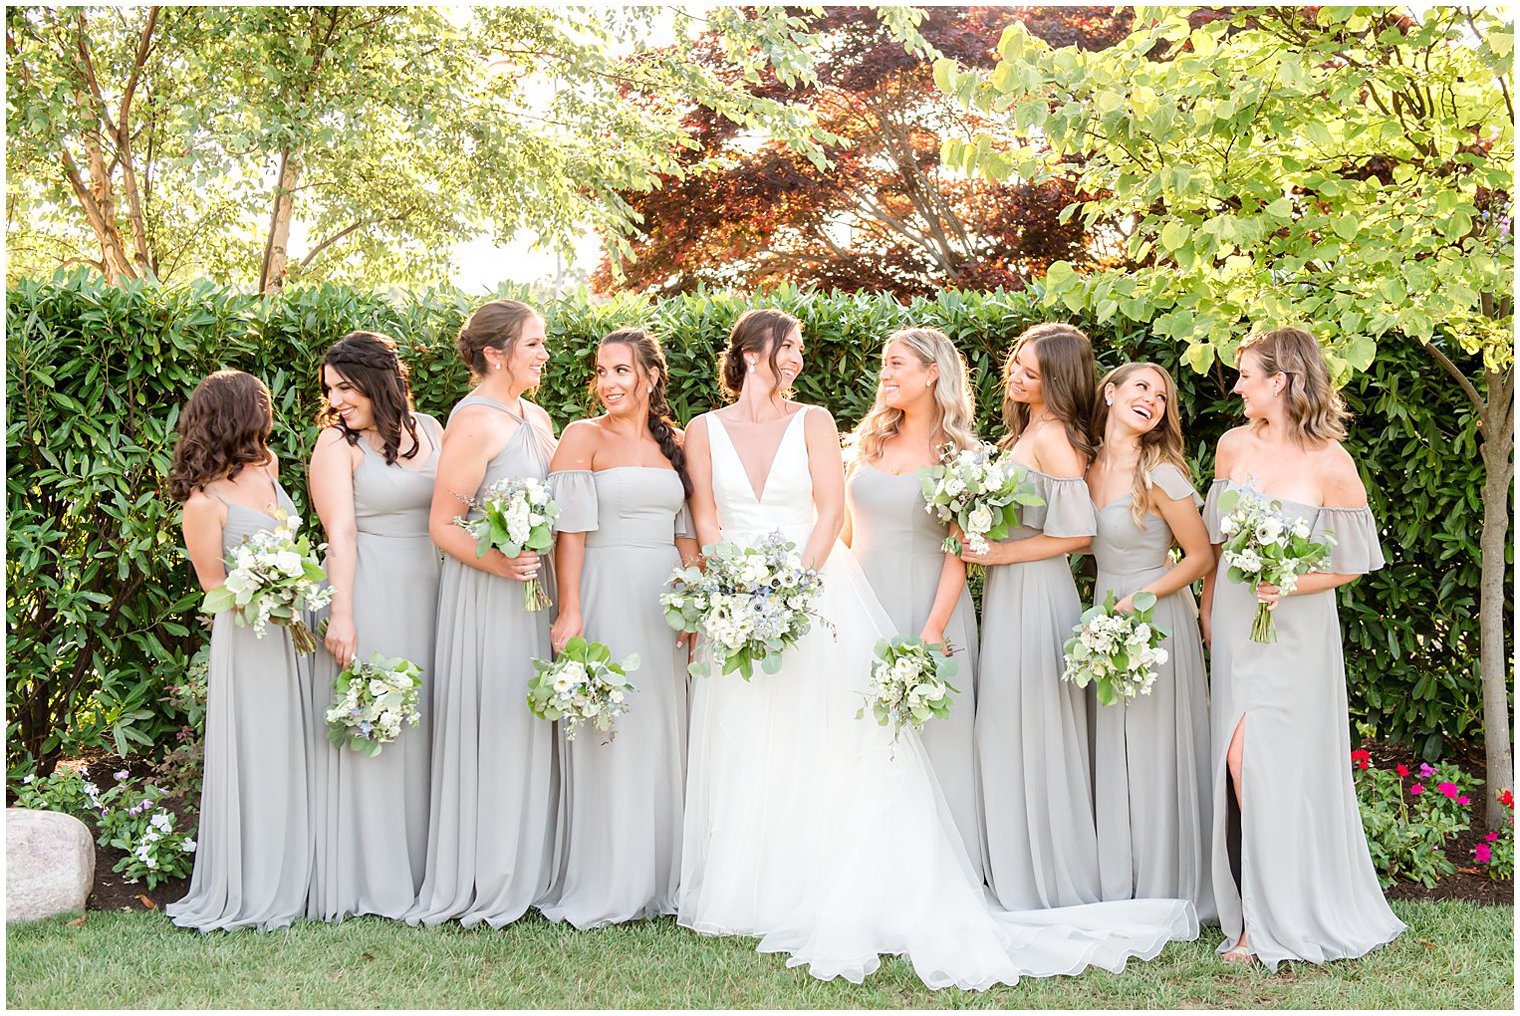 bride and bridesmaids laugh holding bouquets in gardens